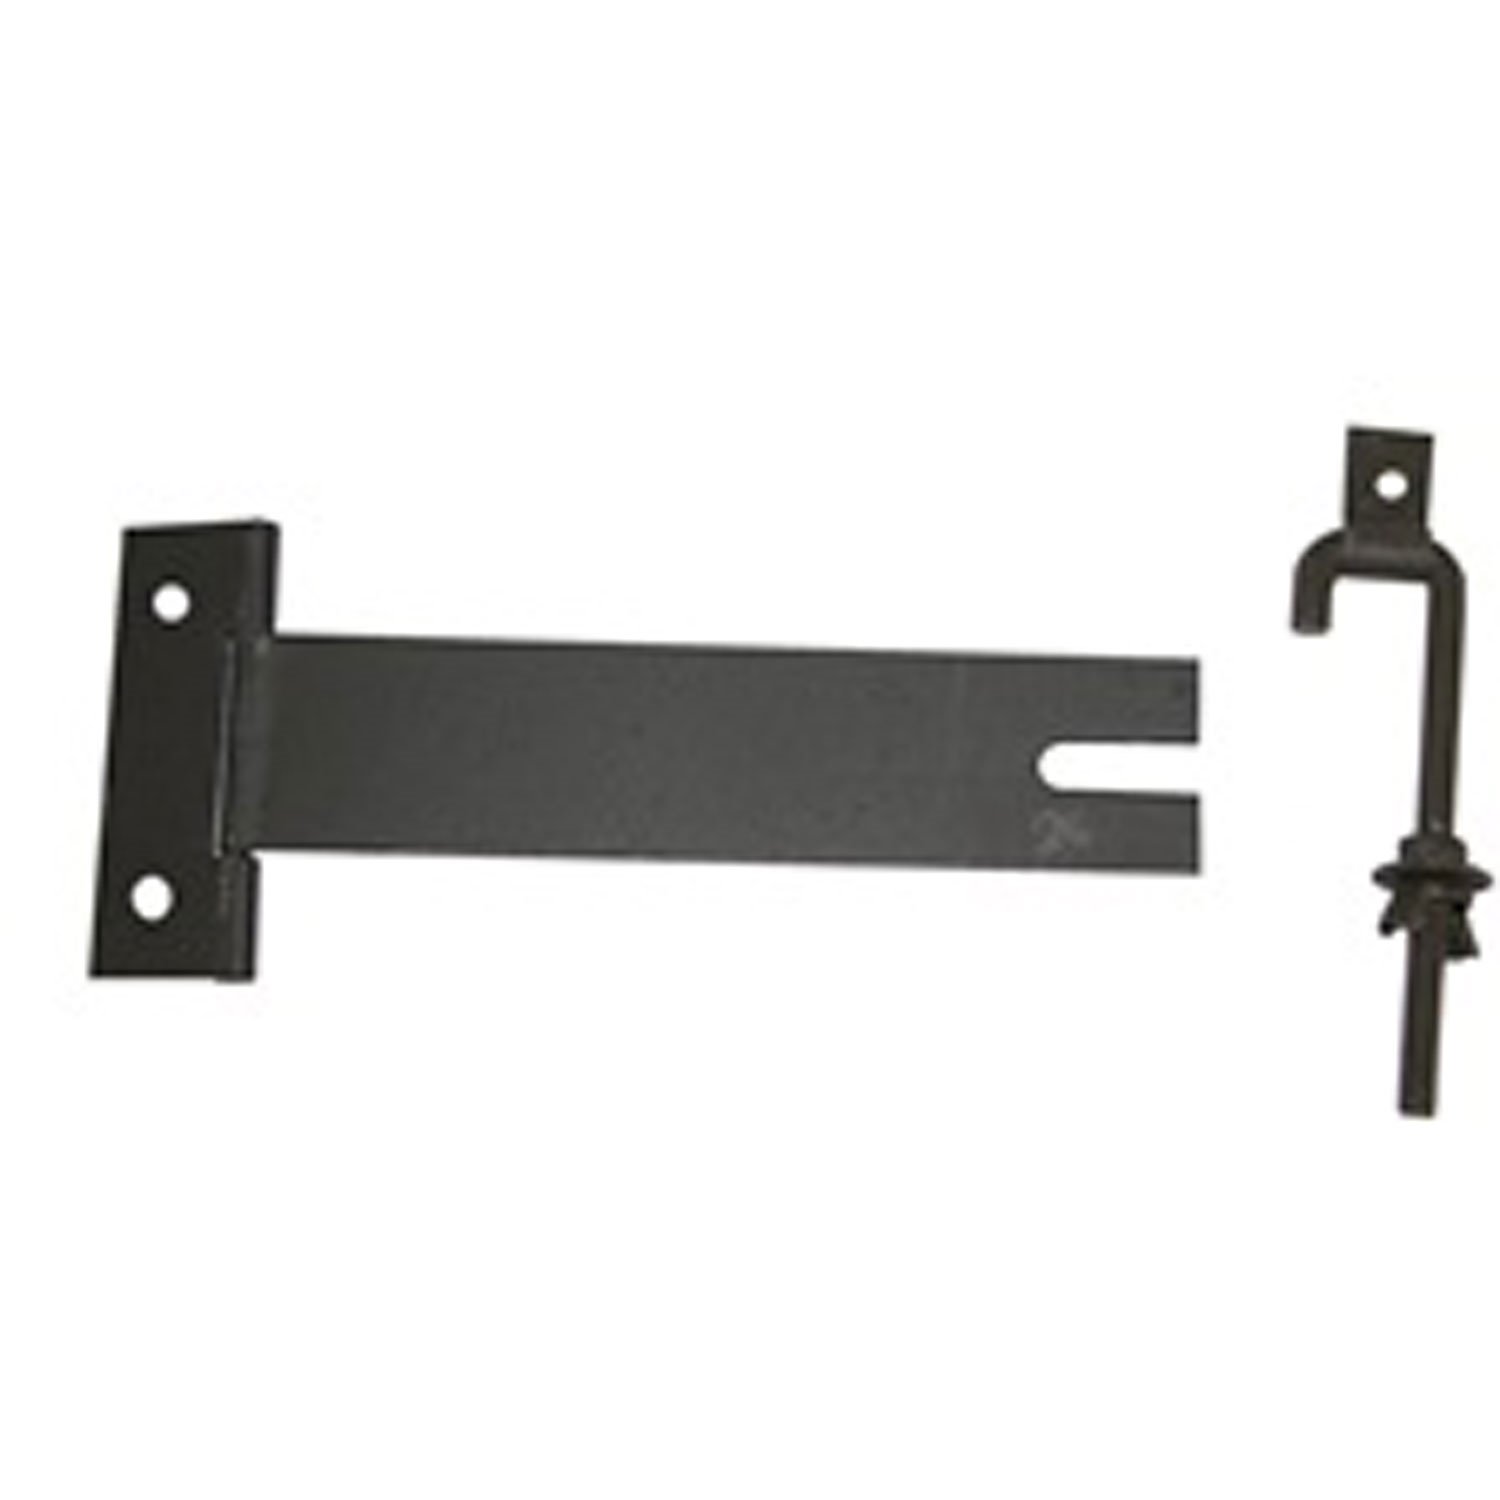 Replacement first aid kit mounting bracket from Omix-ADA,